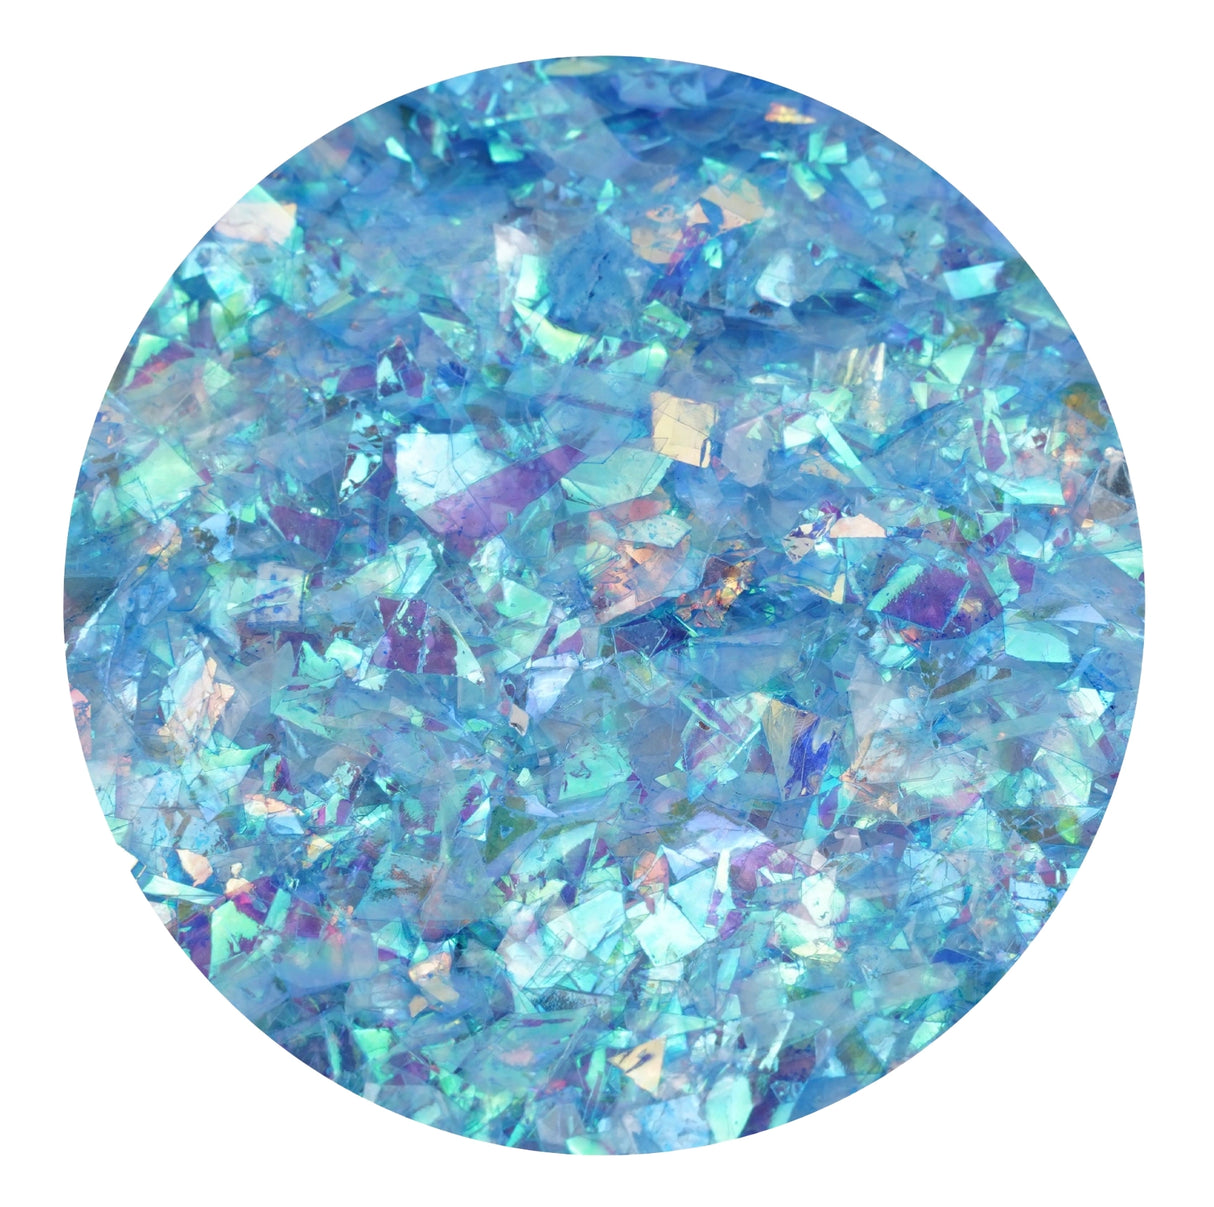 Iridescent Fractured Flakes - Blue